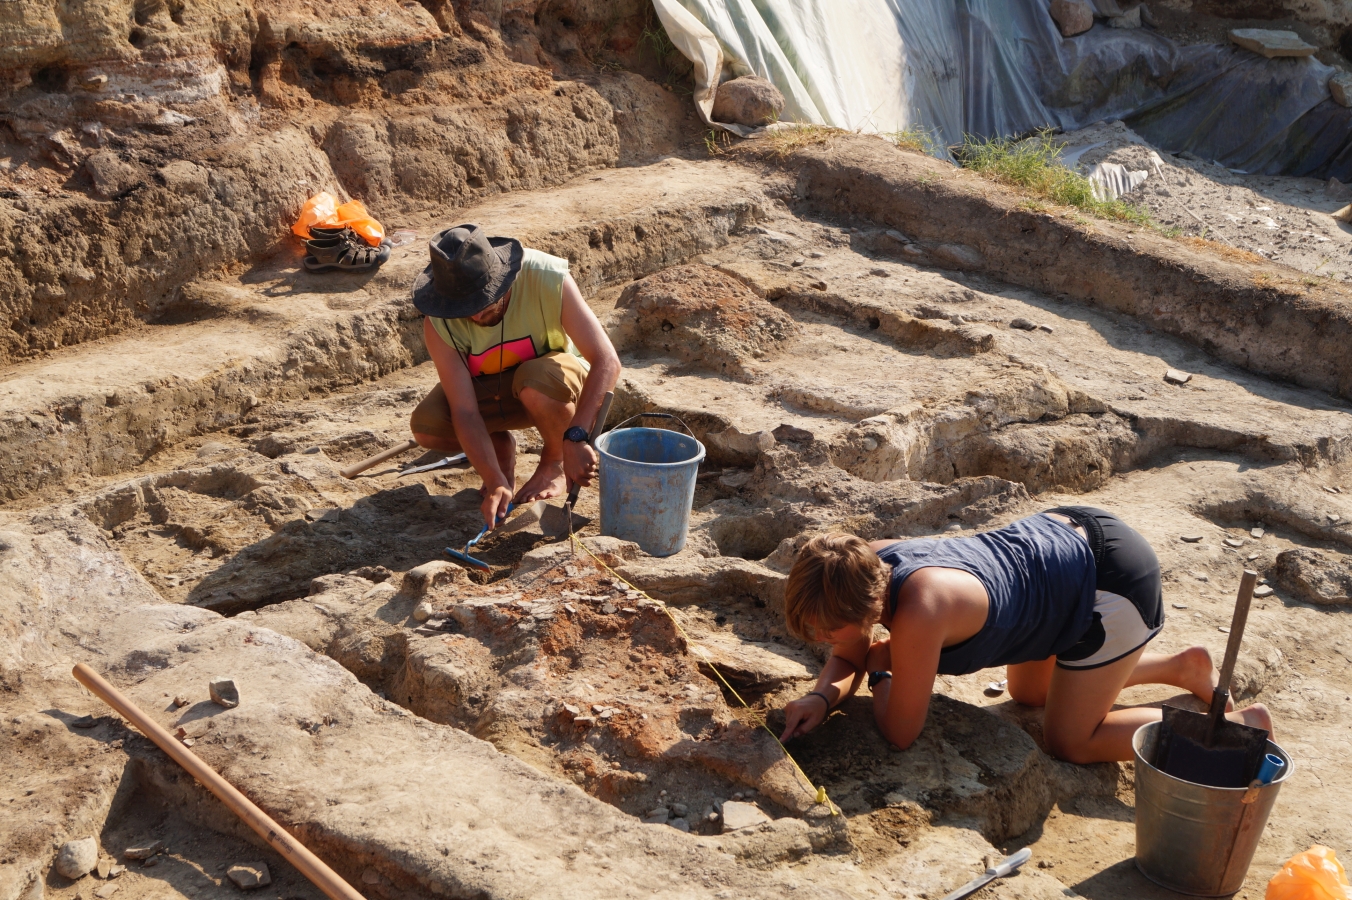 Archaeological excavation in progress.